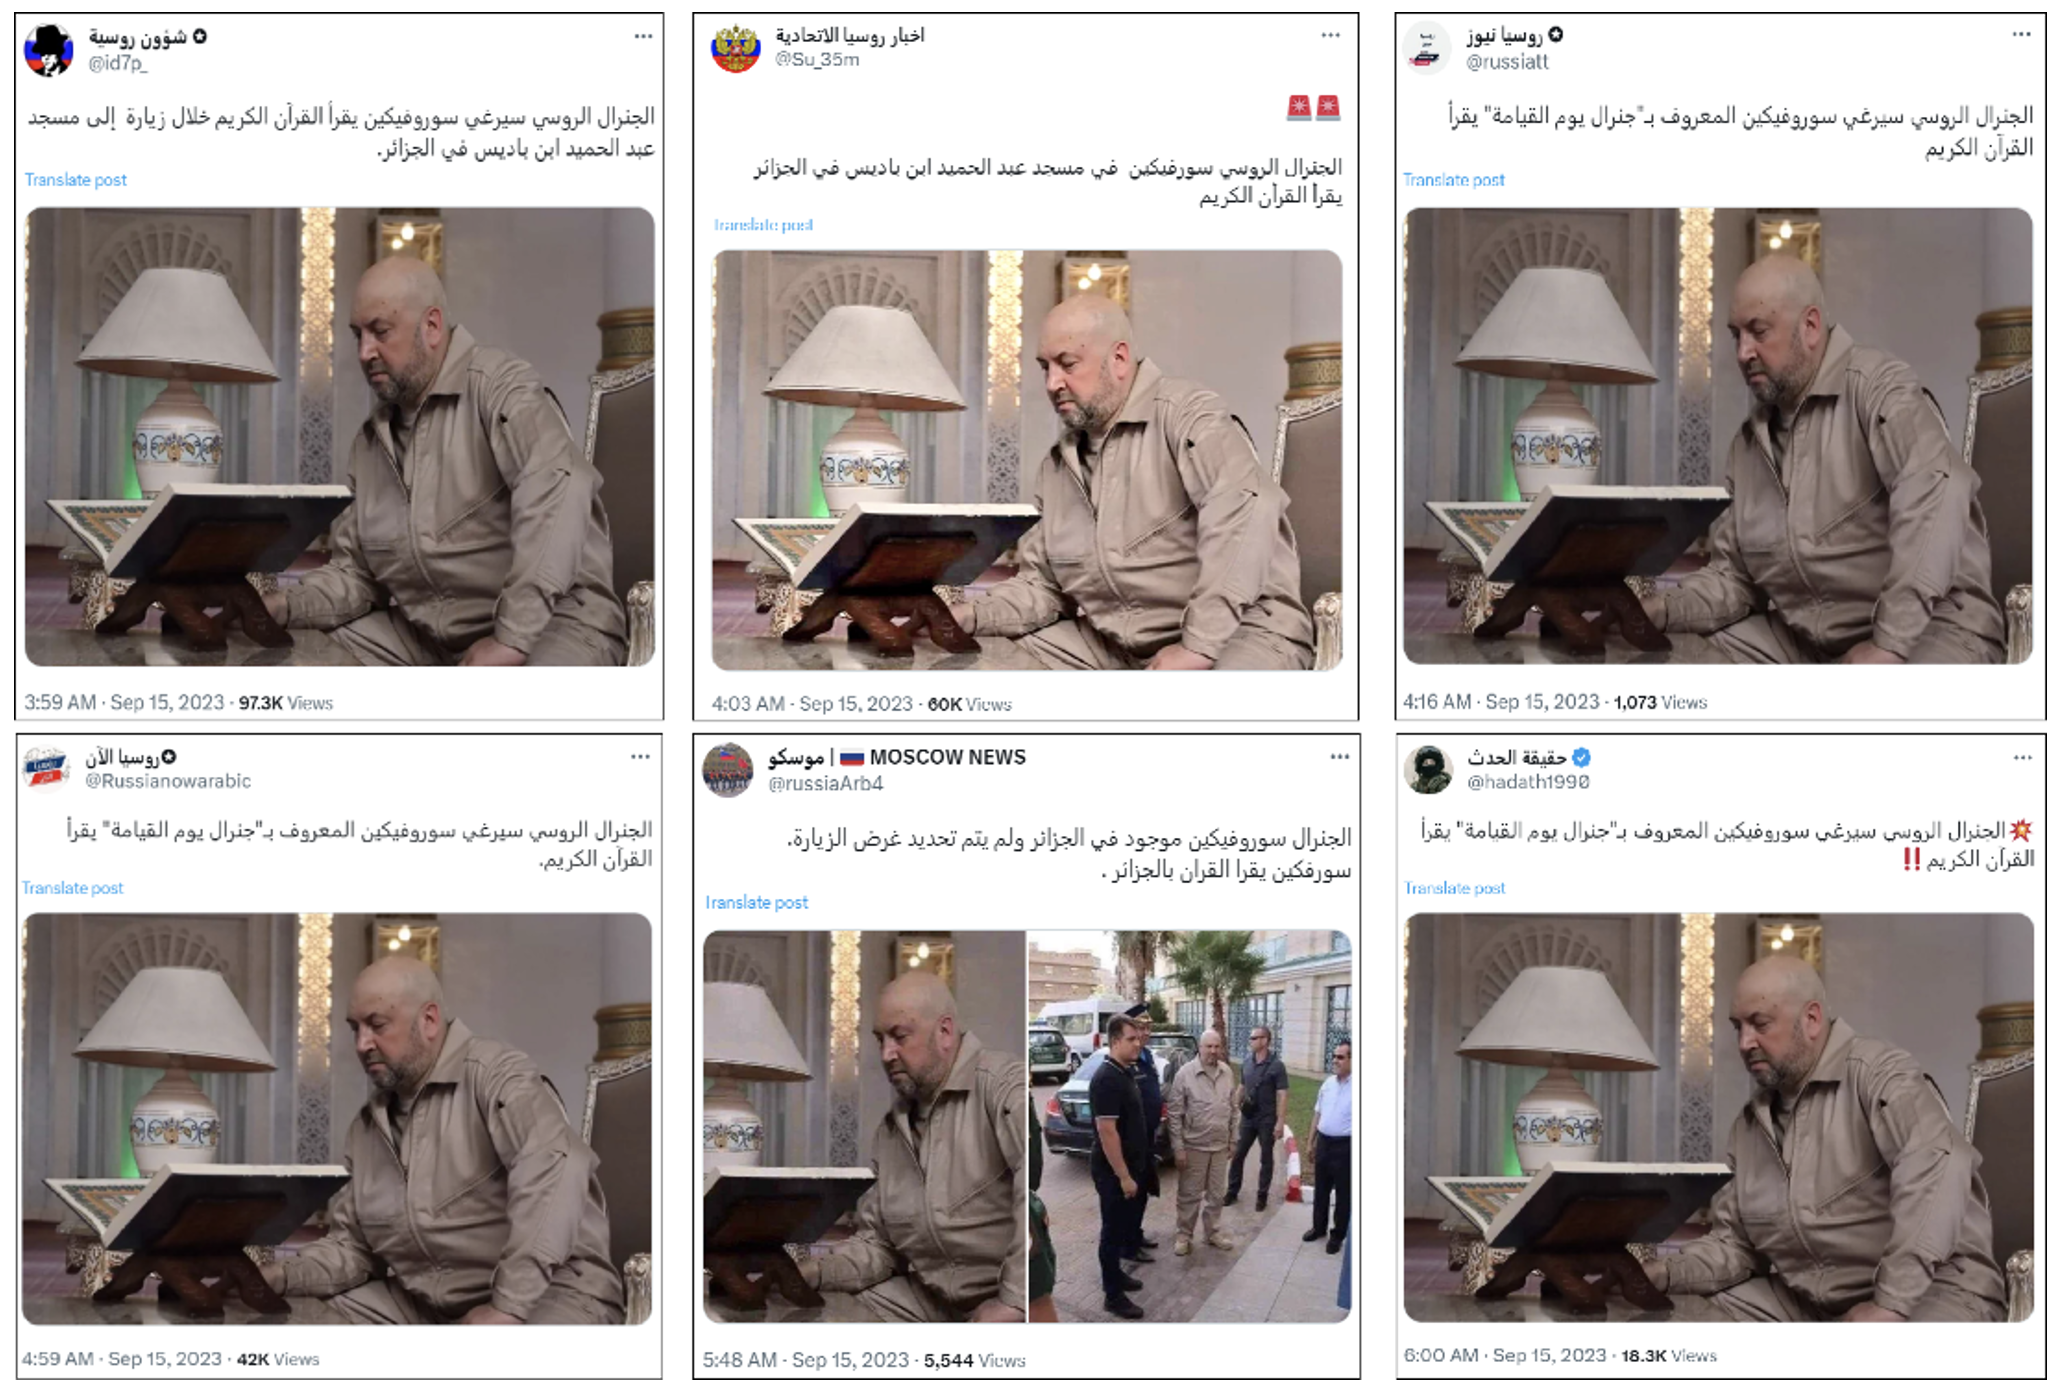 Screenshots of similar X posts from six accounts showing Russian General Sergei Surovikin reading from the Quran during a visit to Algeria. The posts use the same (or highly similar) text and an identical (or nearly identical) photo. (Source, left to right, top to bottom: @id7p_; @Su_35m; @russiatt; @Russianowarabic; @russiaArb4; @hadath1990) 